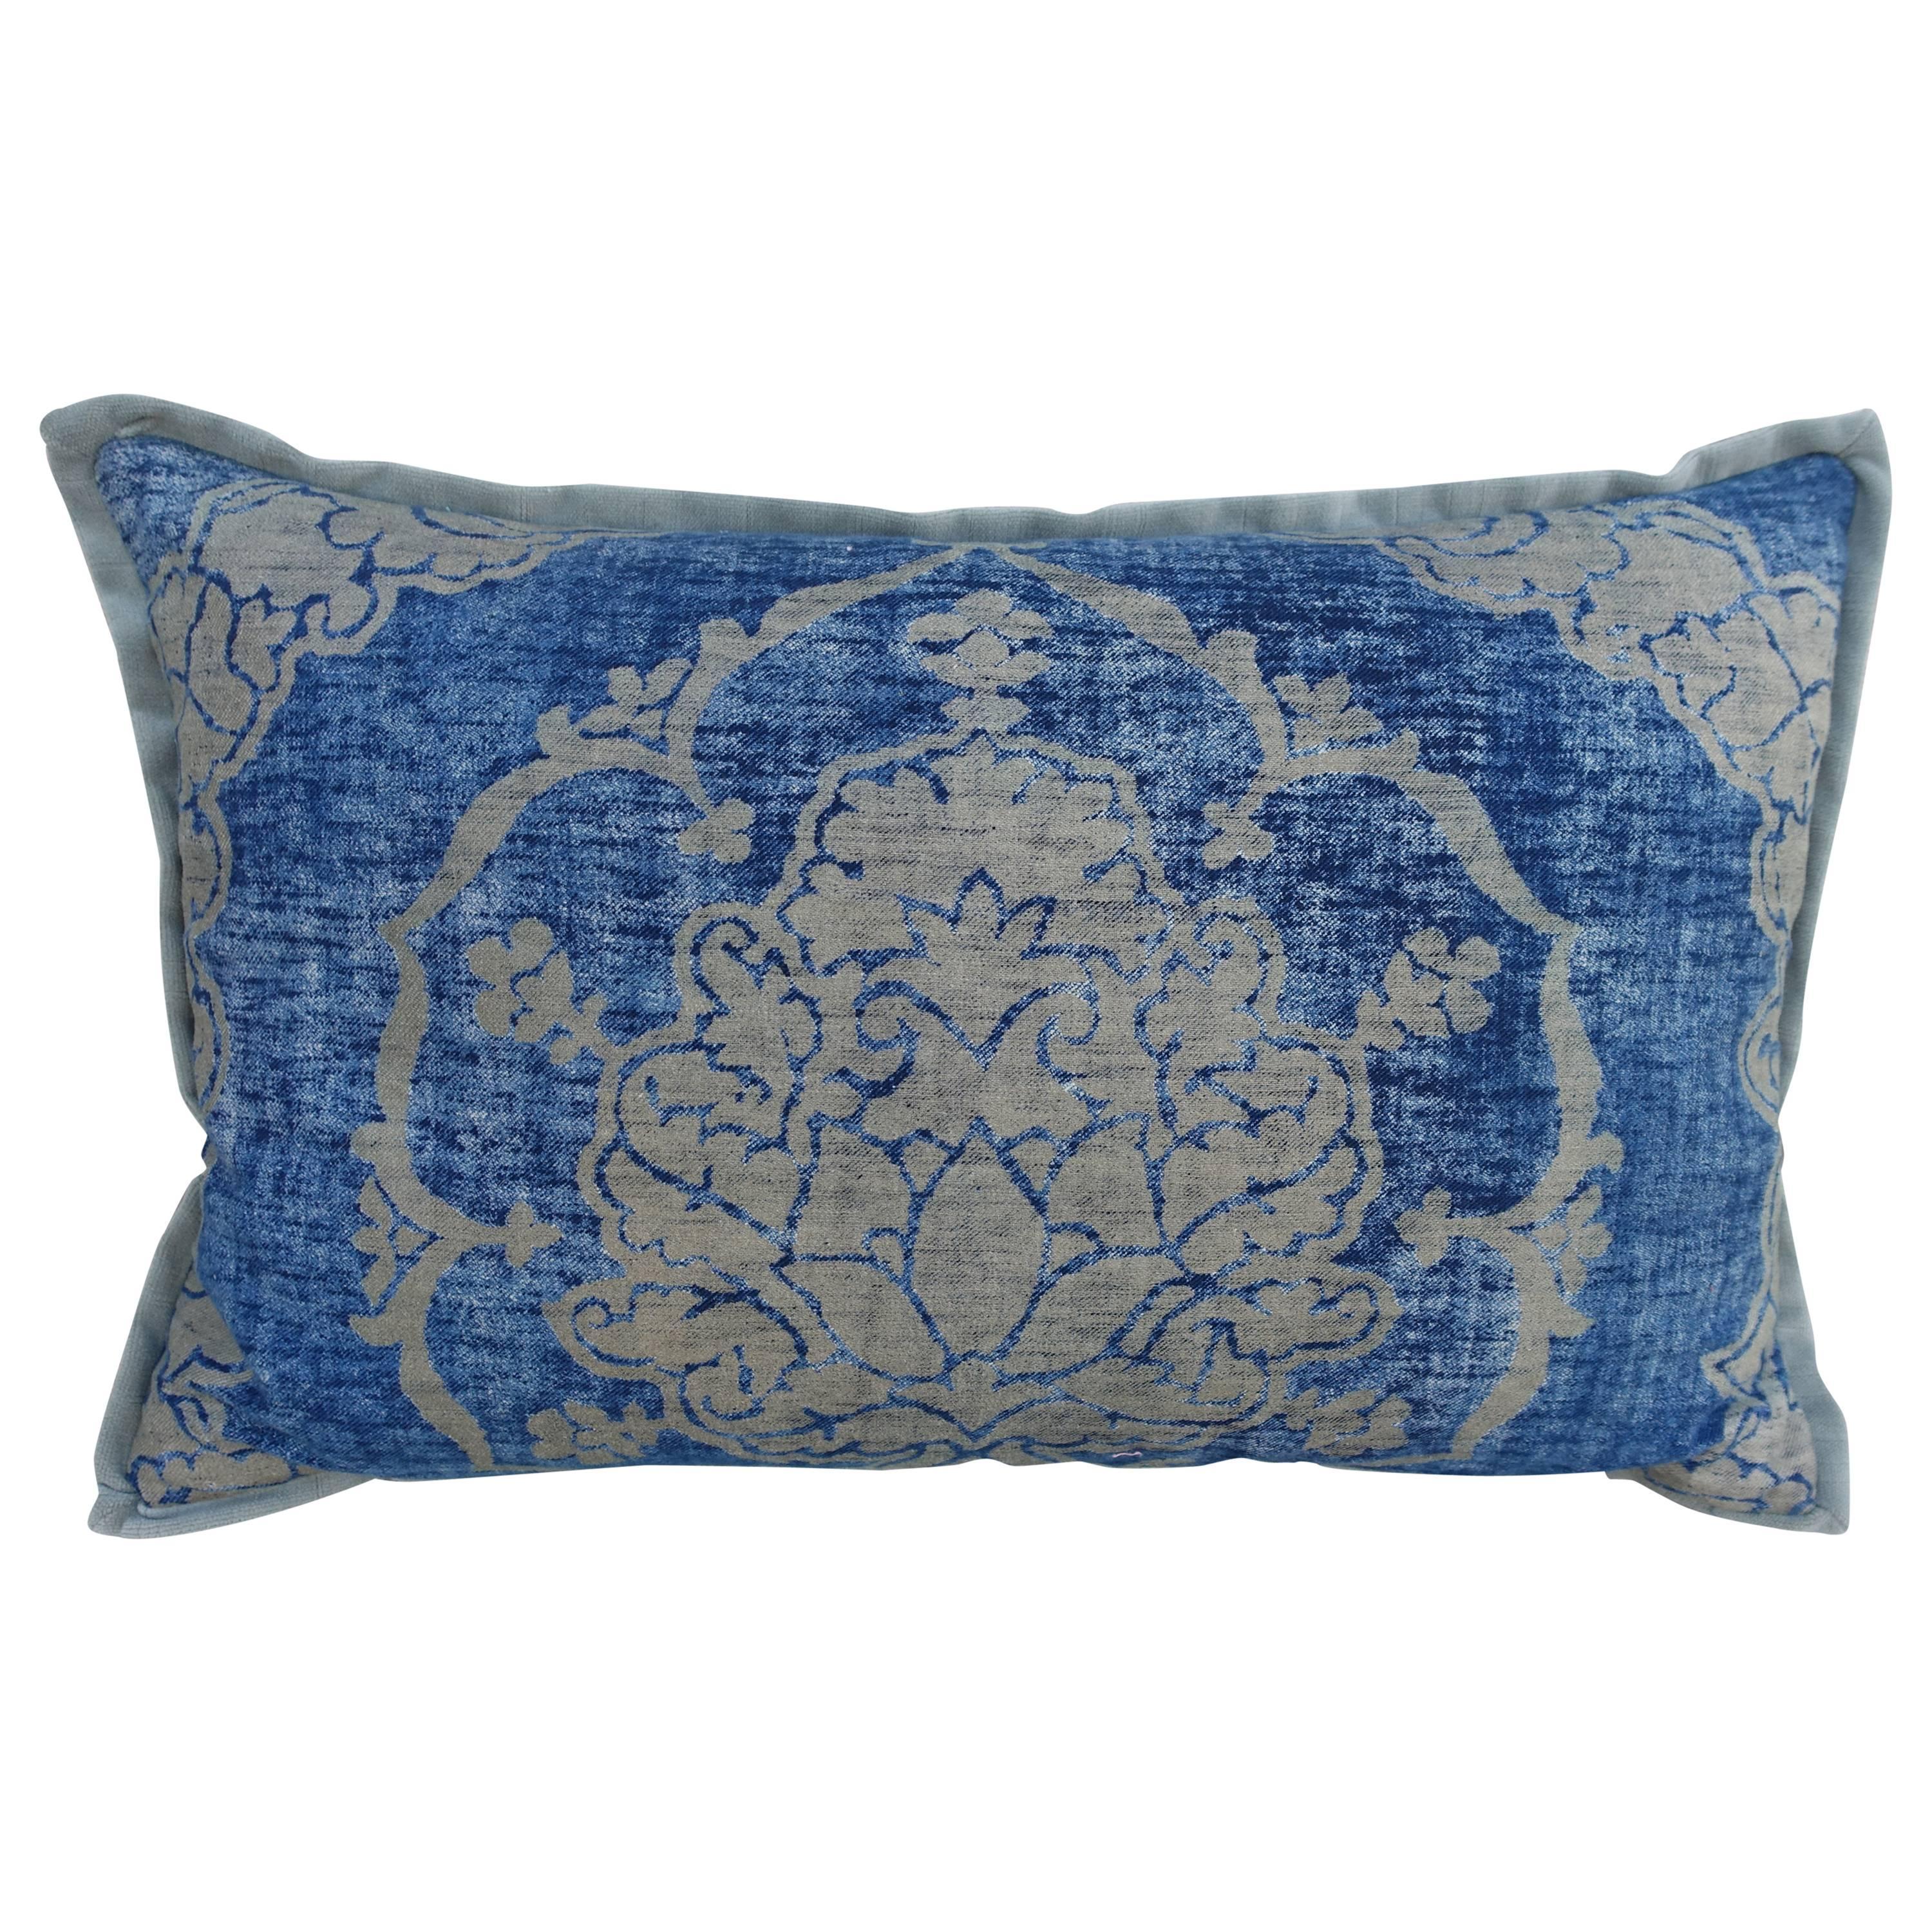 Blue and Gray Vintage Fortuny Textile Pillow